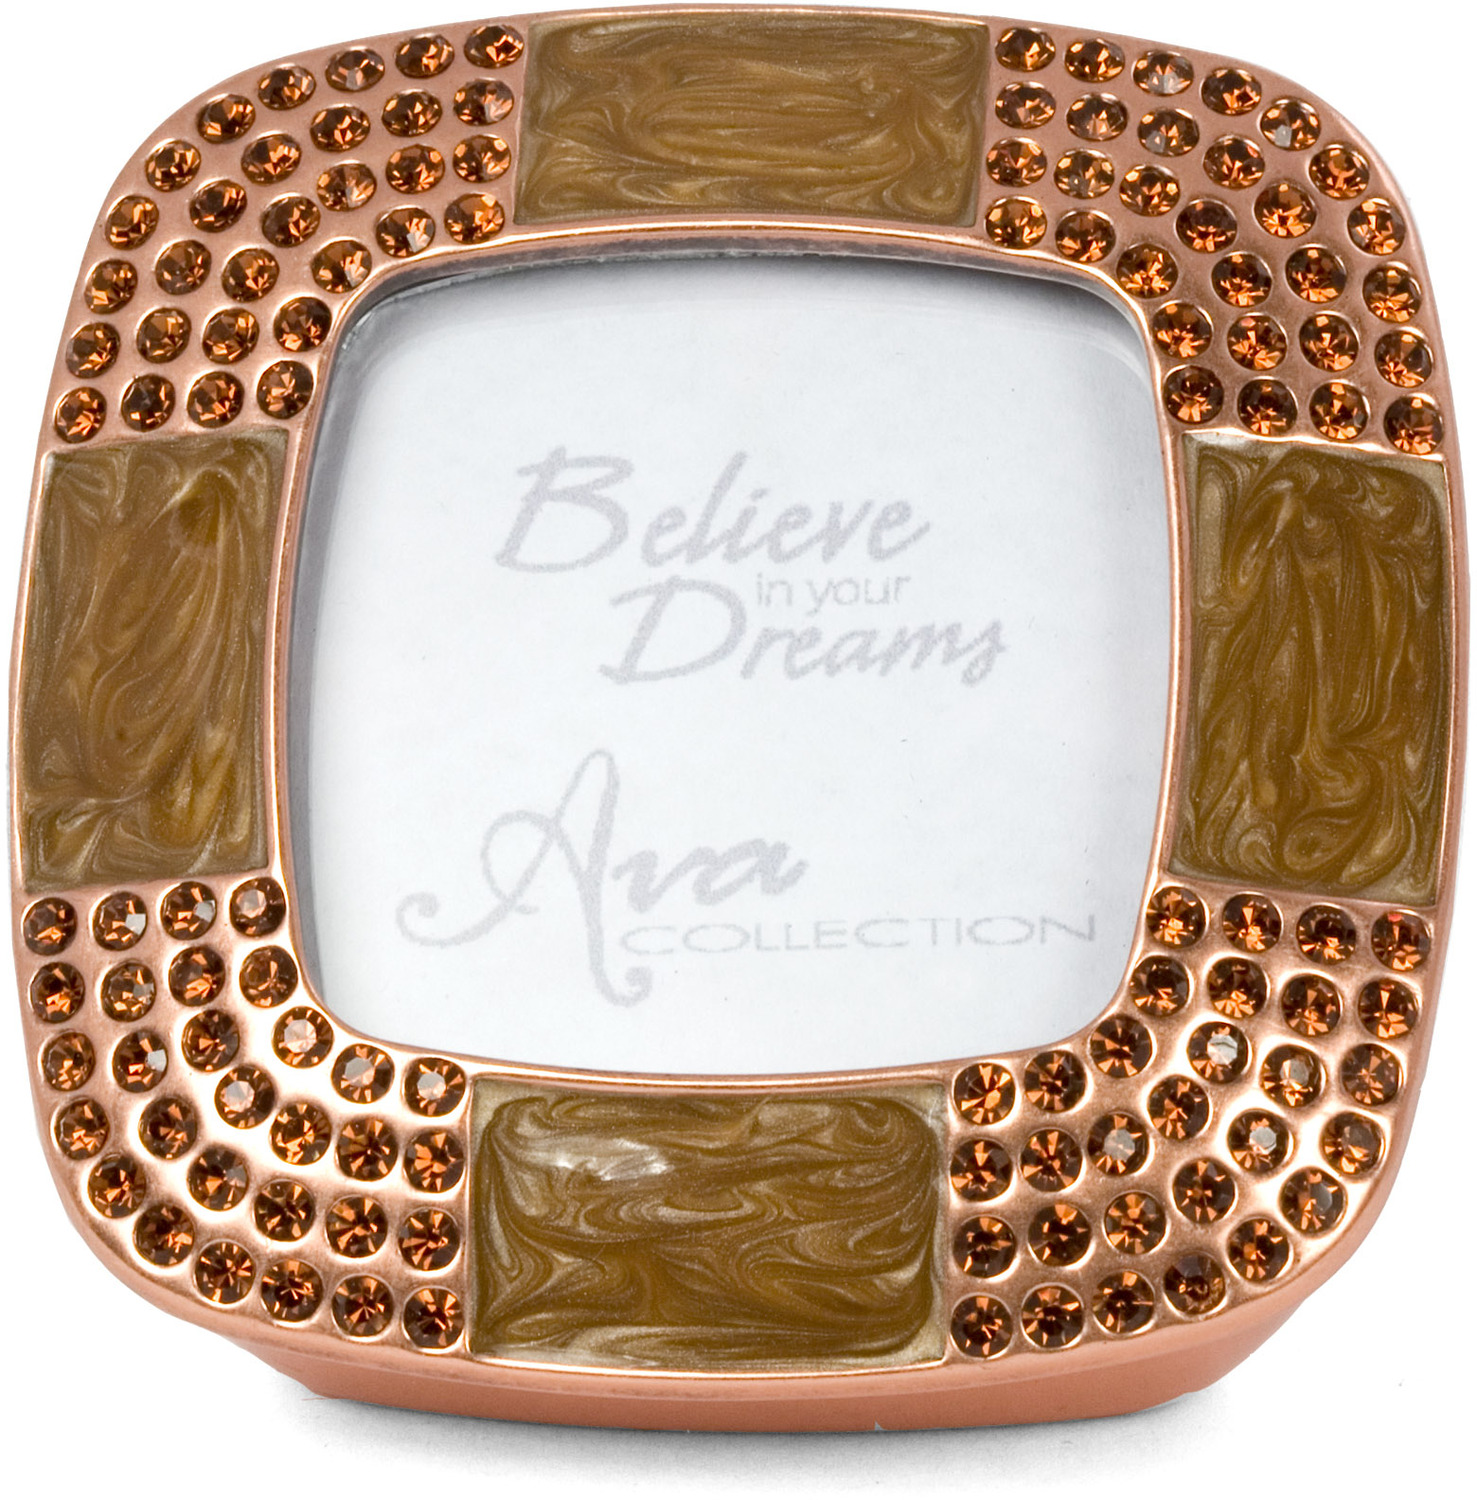 Copper Topaz Frame & Box by Ava Collection - Copper Topaz Frame & Box - Copper with Smoked Topaz. Holds 1.5" x 1.5" Photo